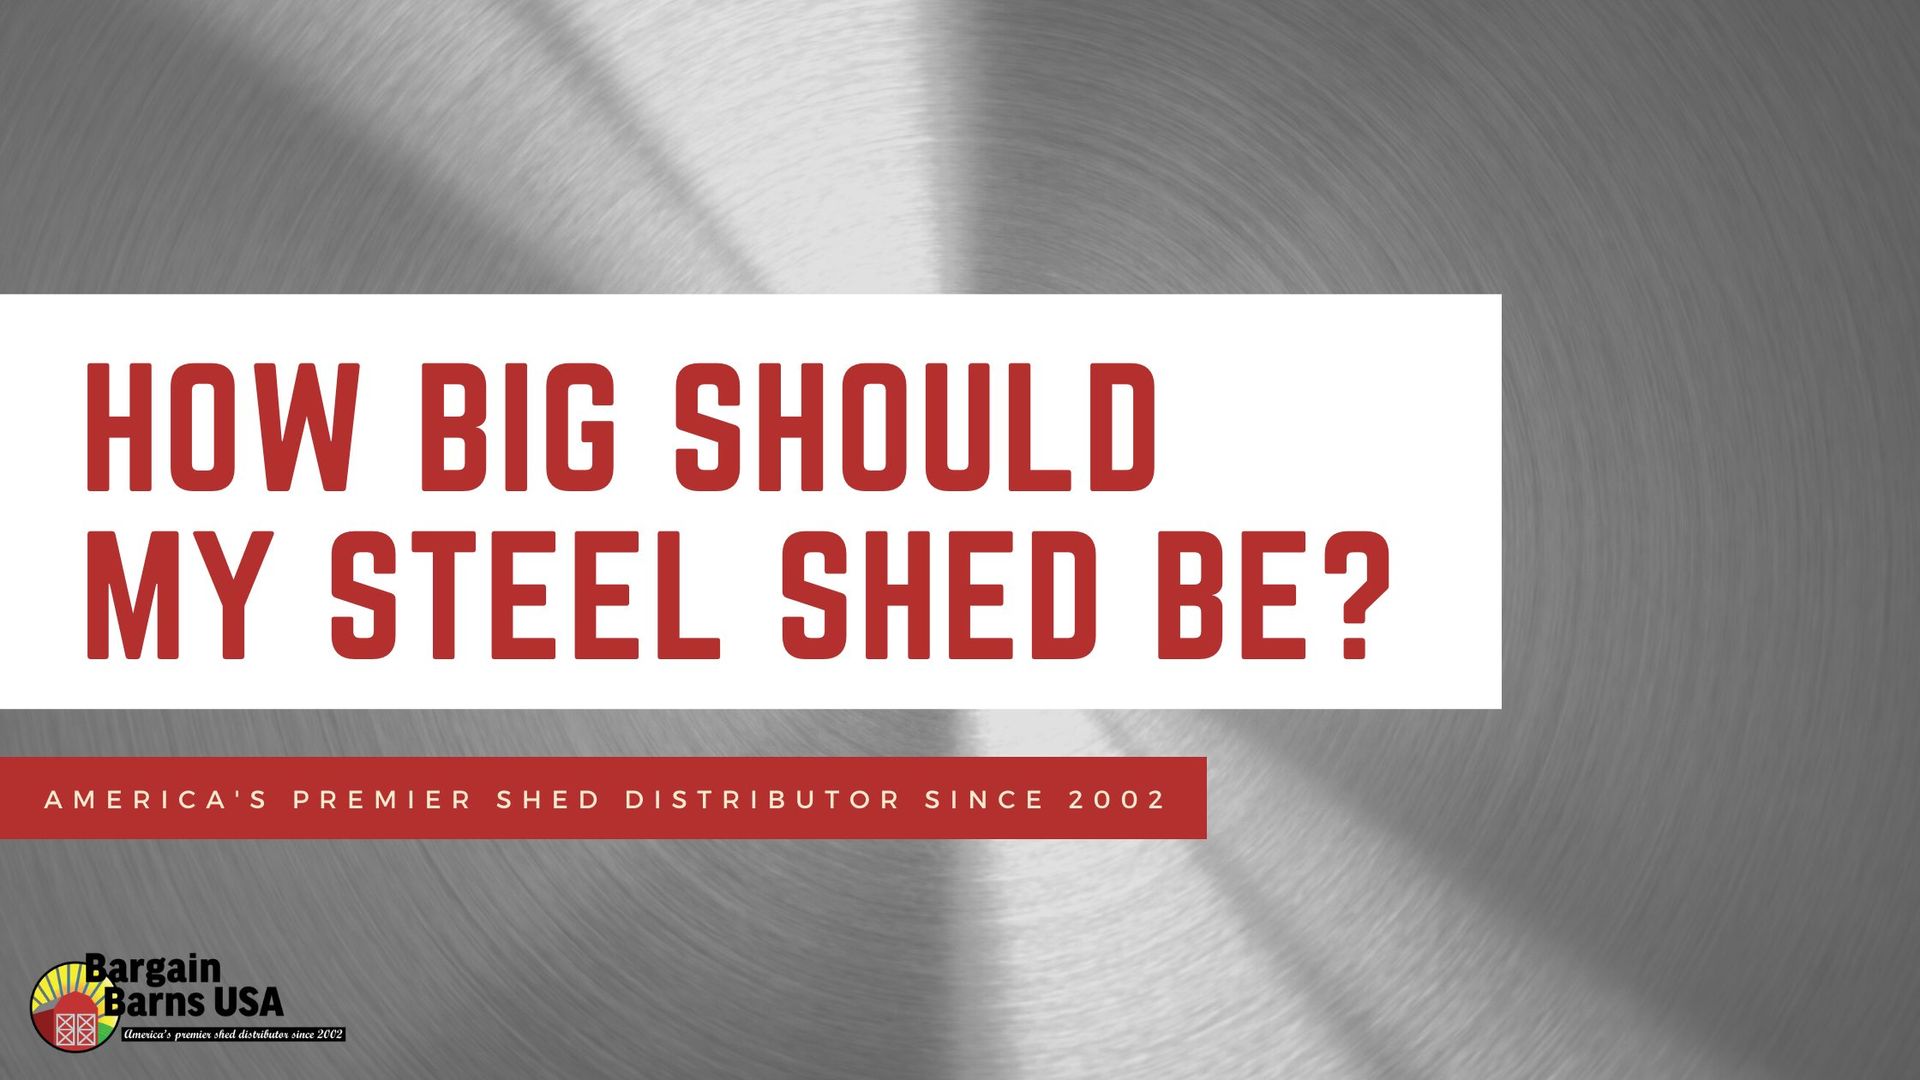 How Big Should My Steel Shed Be?